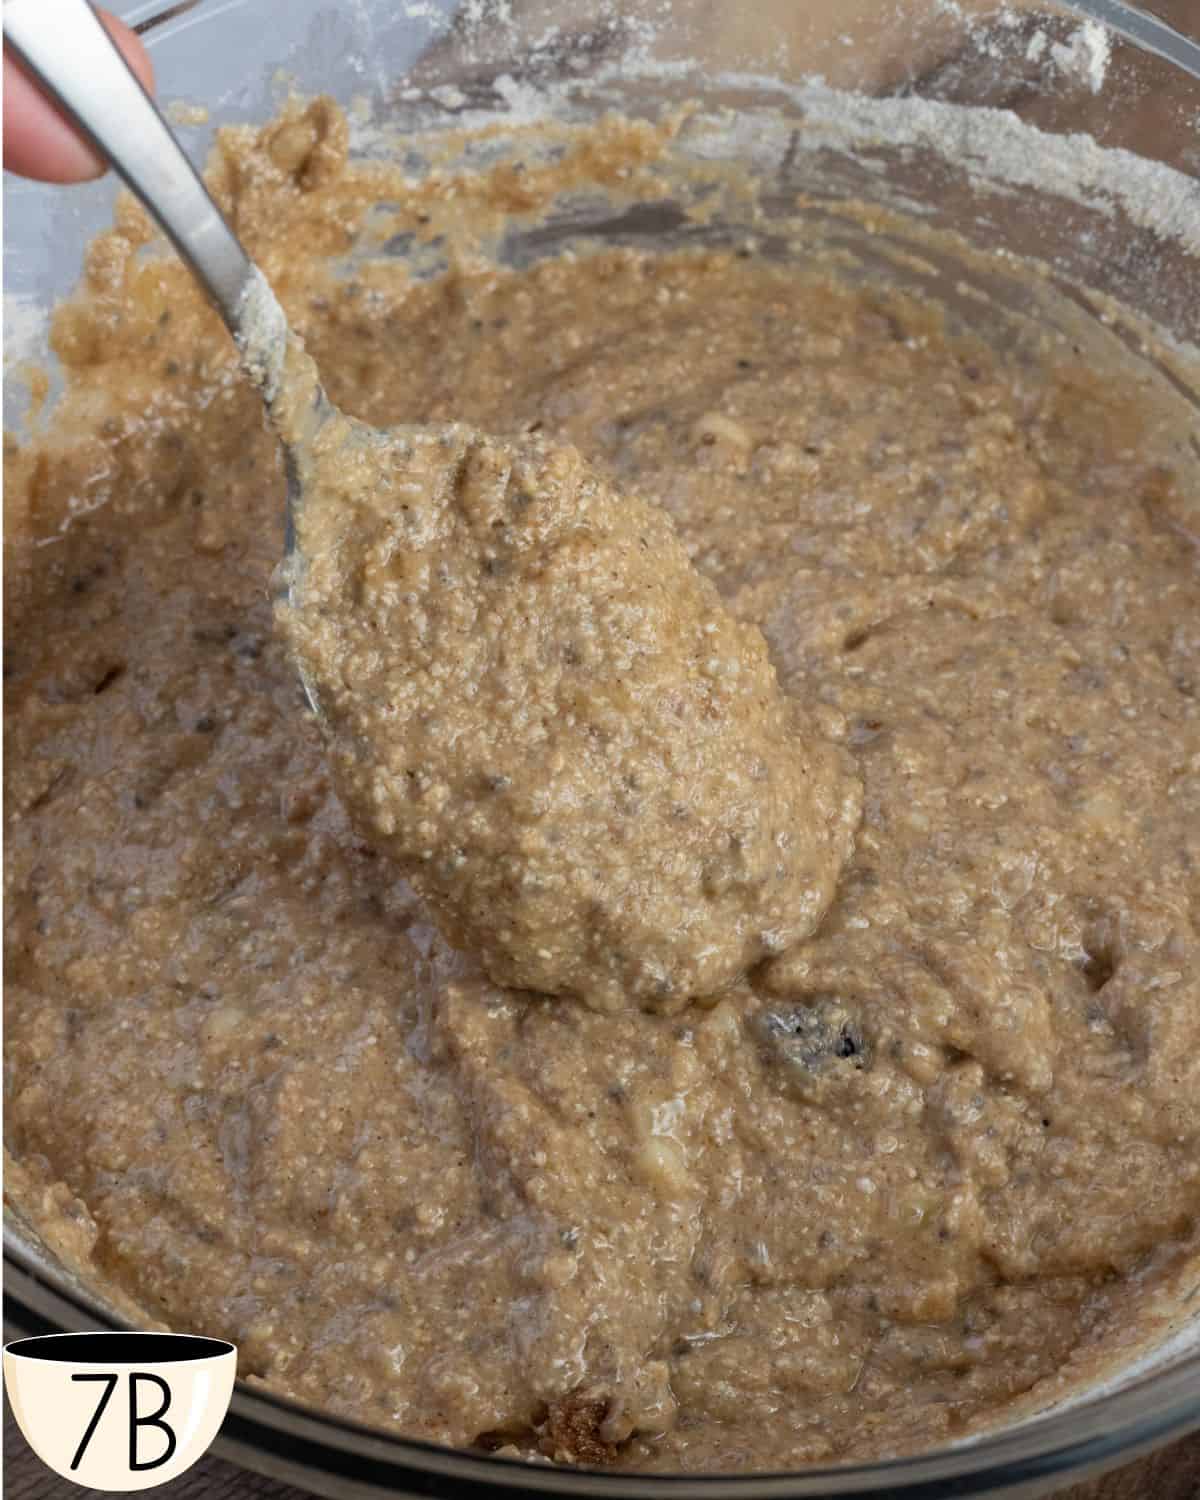 Hand scooping a spoonful of oatmeal muffin batter, showcasing the texture before adding fruit.